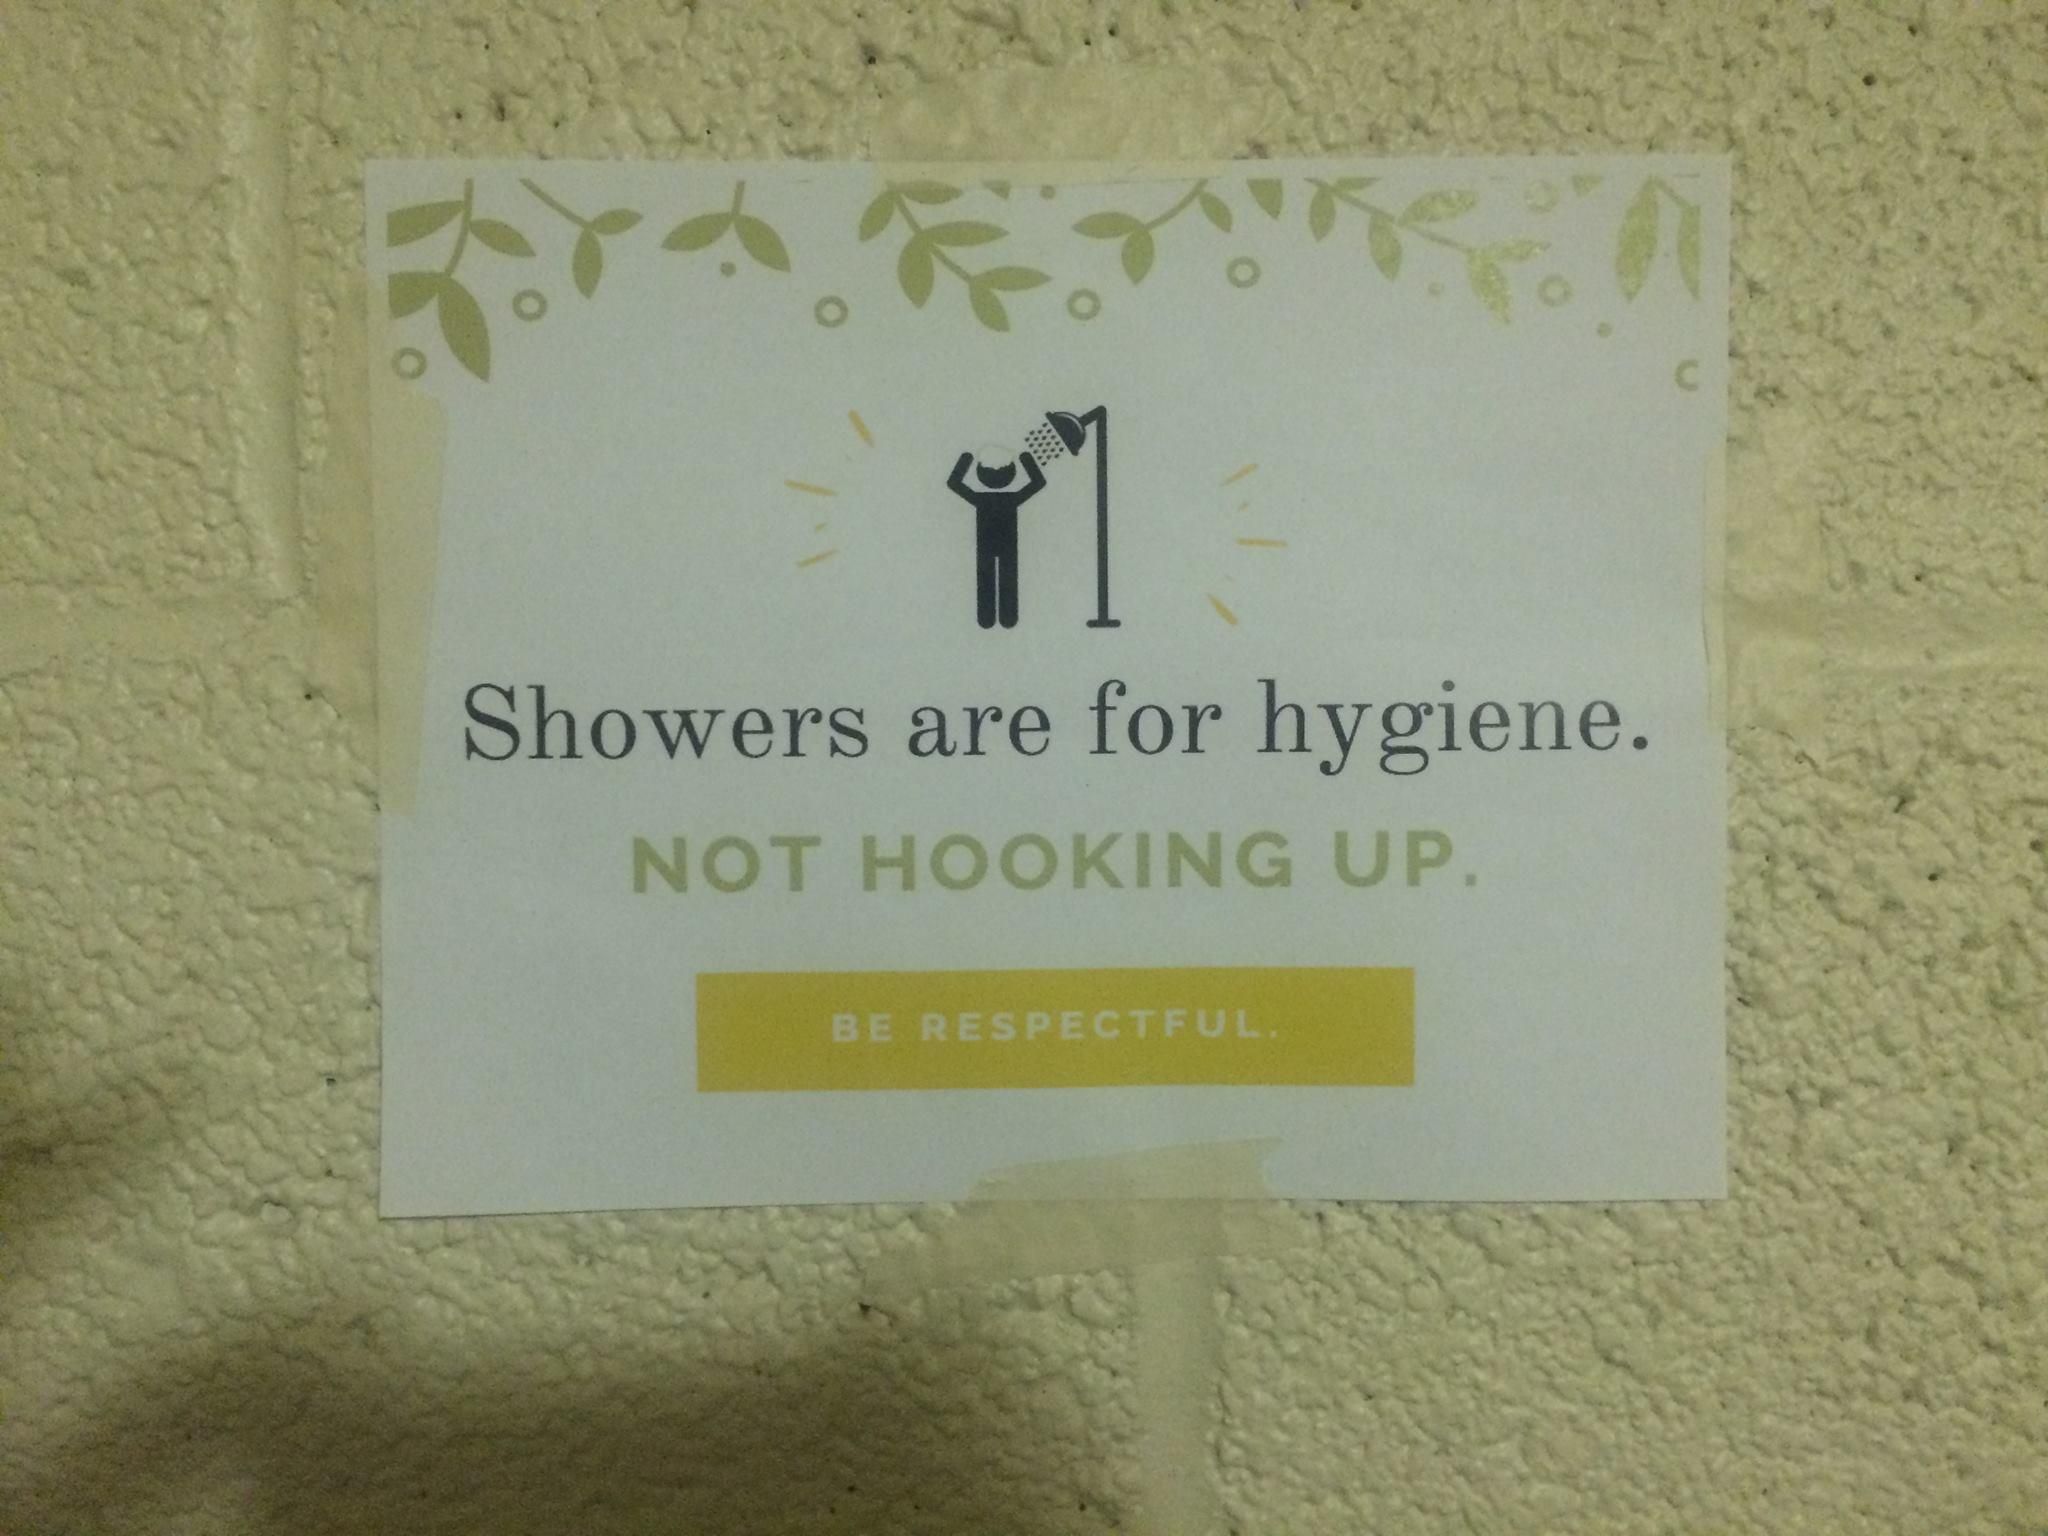 Found in the Co-Ed dorms at Ohio University...